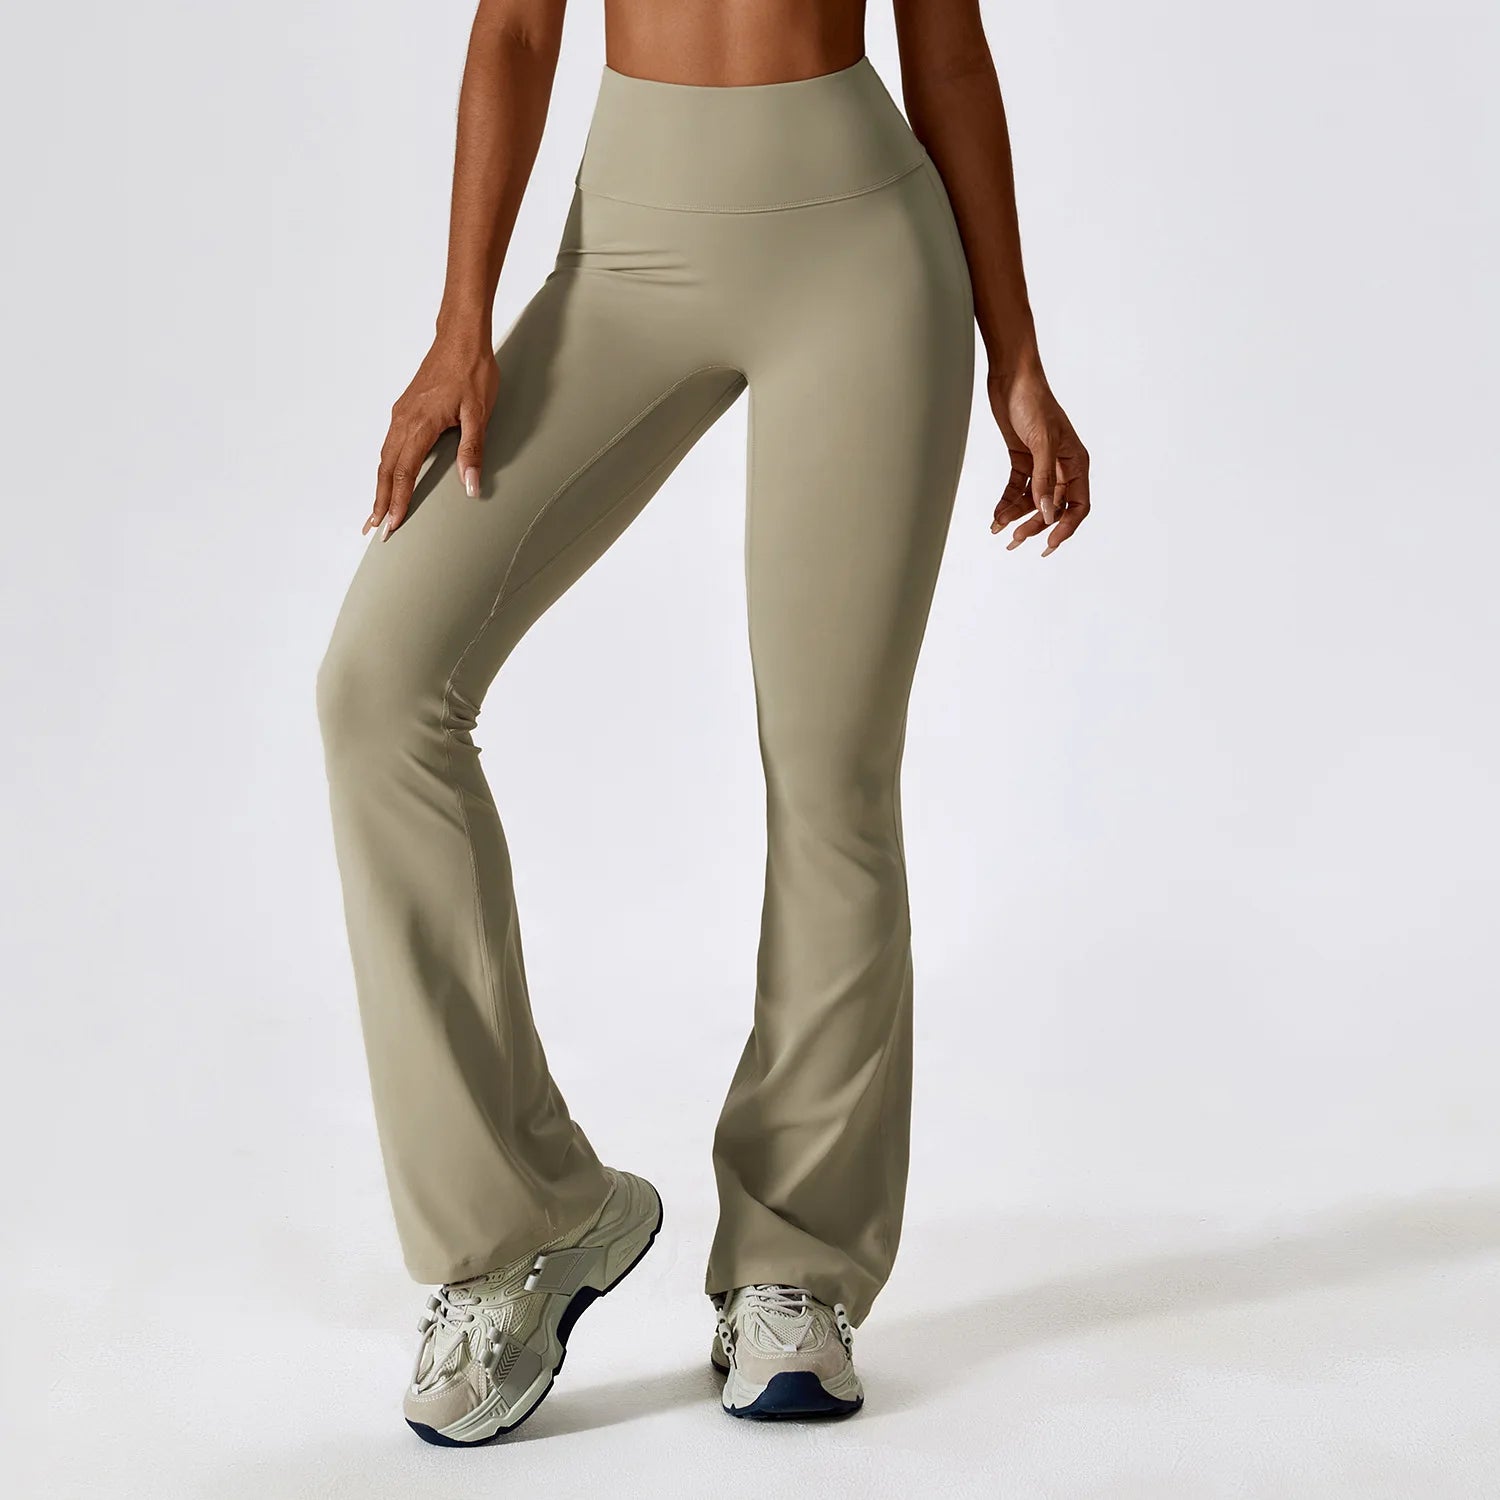 Khaki Colored Women's Flared Bottom Gym Tights